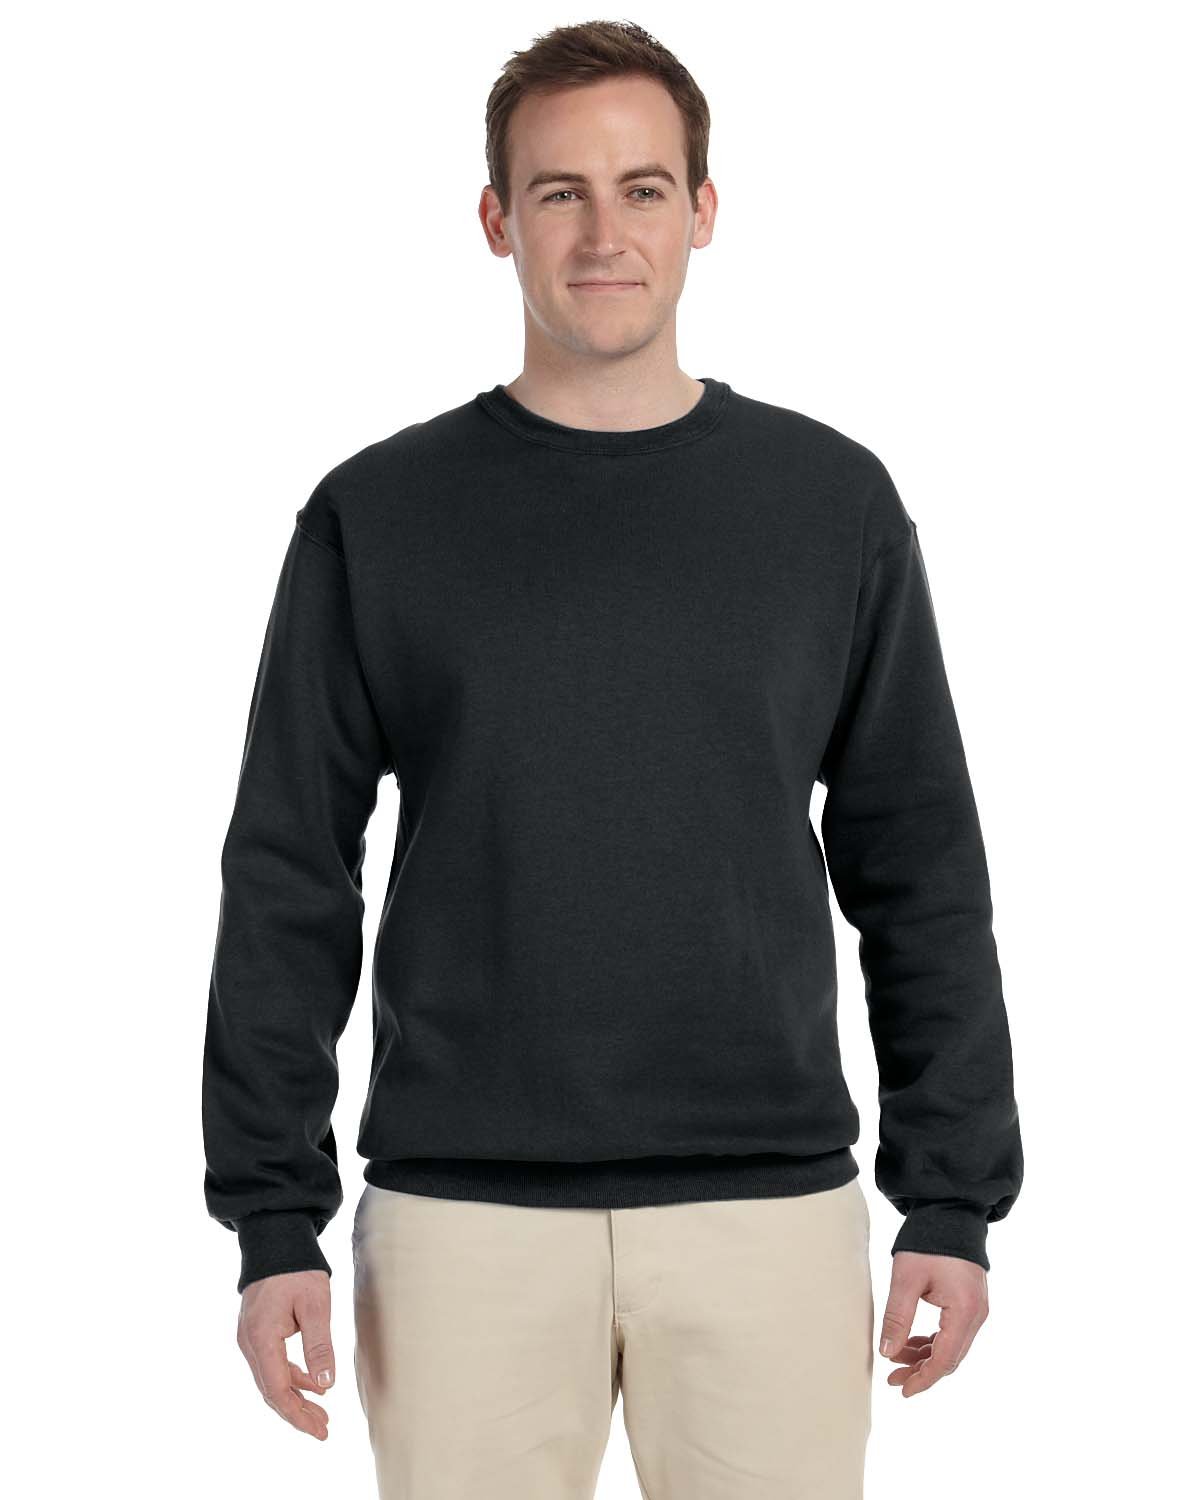 Picture of Fruit of the Loom Supercotton™ Fleece Crew